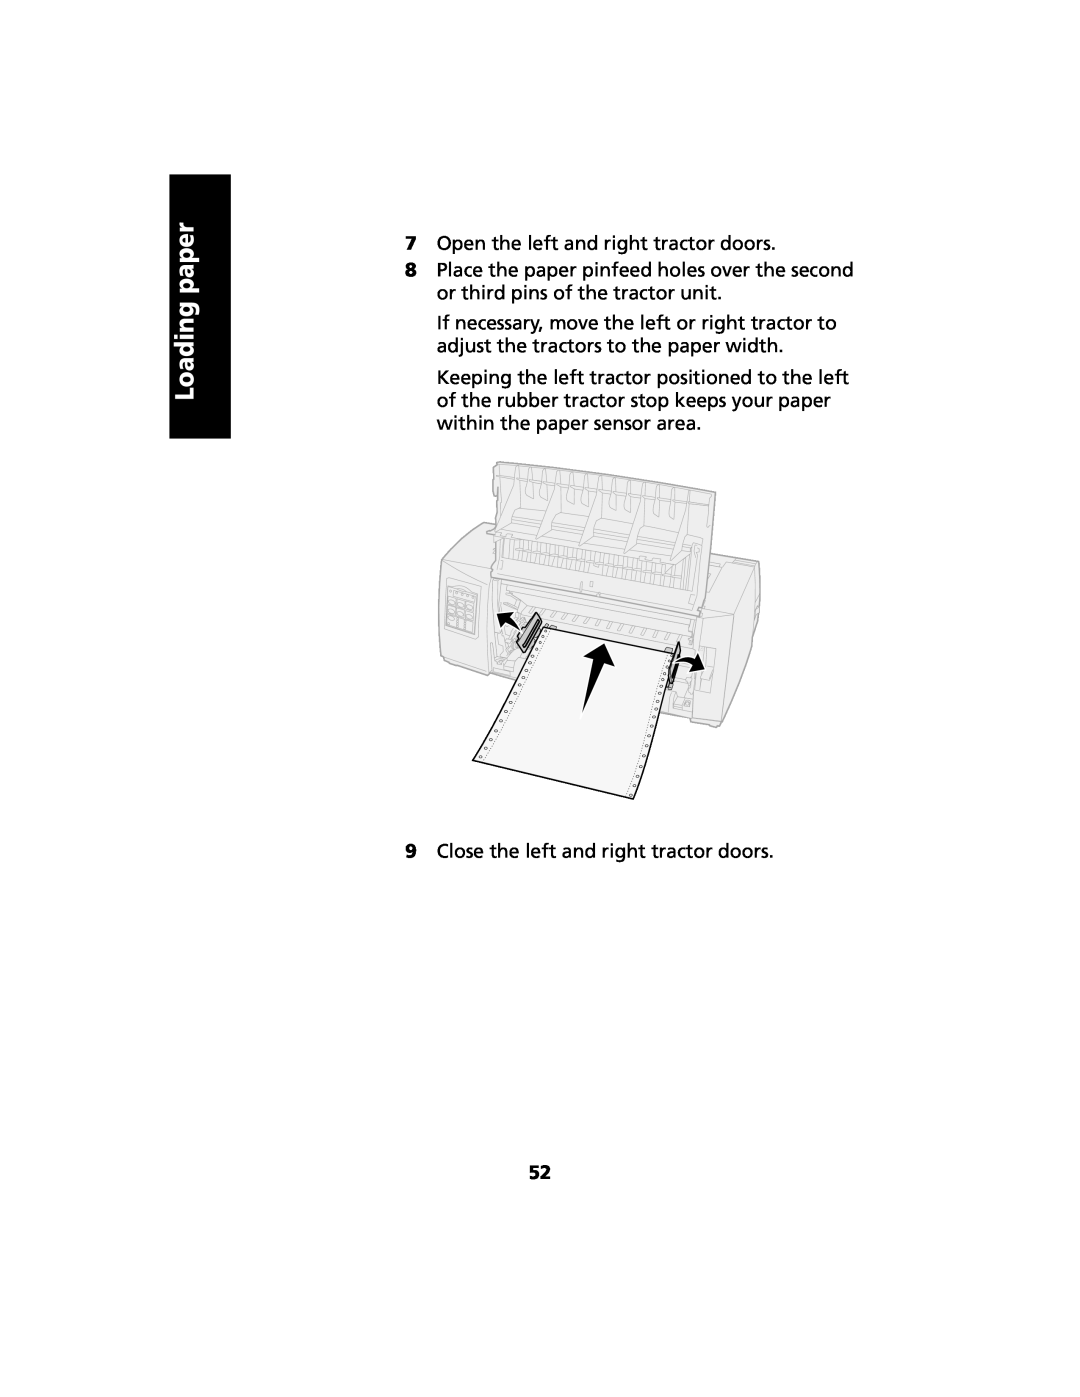 Lexmark 2480 manual Loading paper, Open the left and right tractor doors 